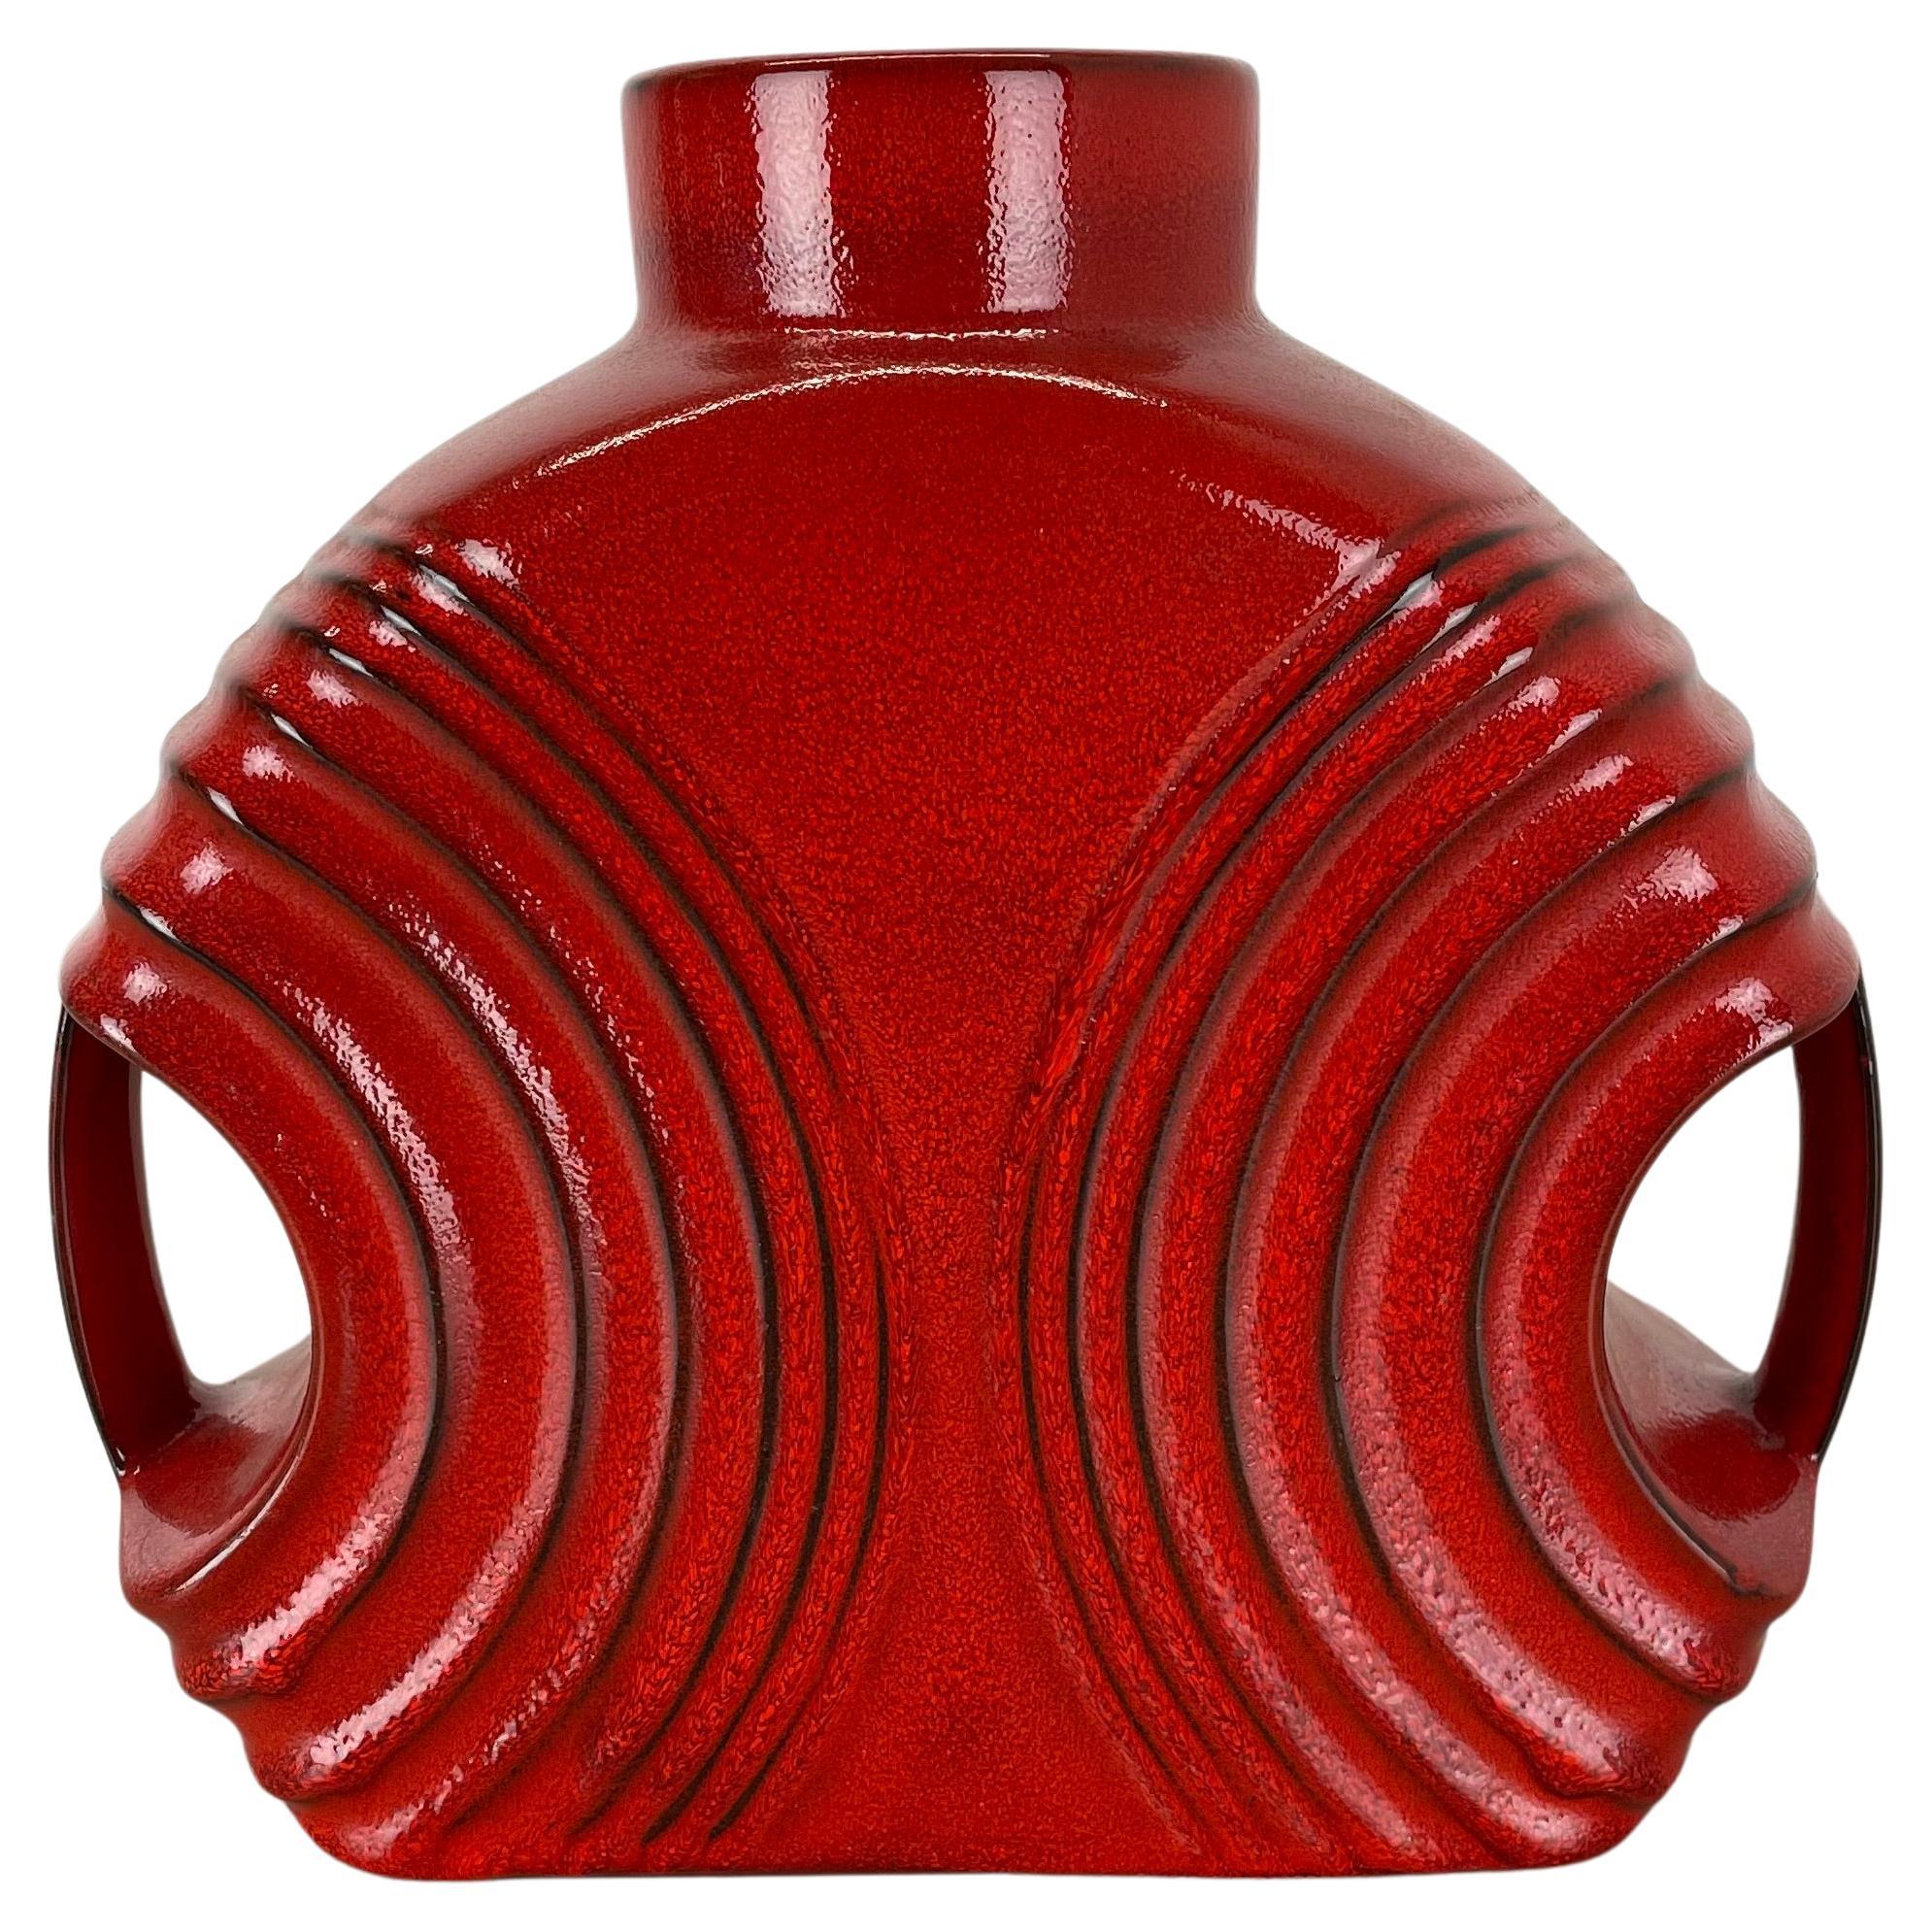 Large red abstract vase object by Cari Zalloni for Steuler, Germany, 1970s For Sale